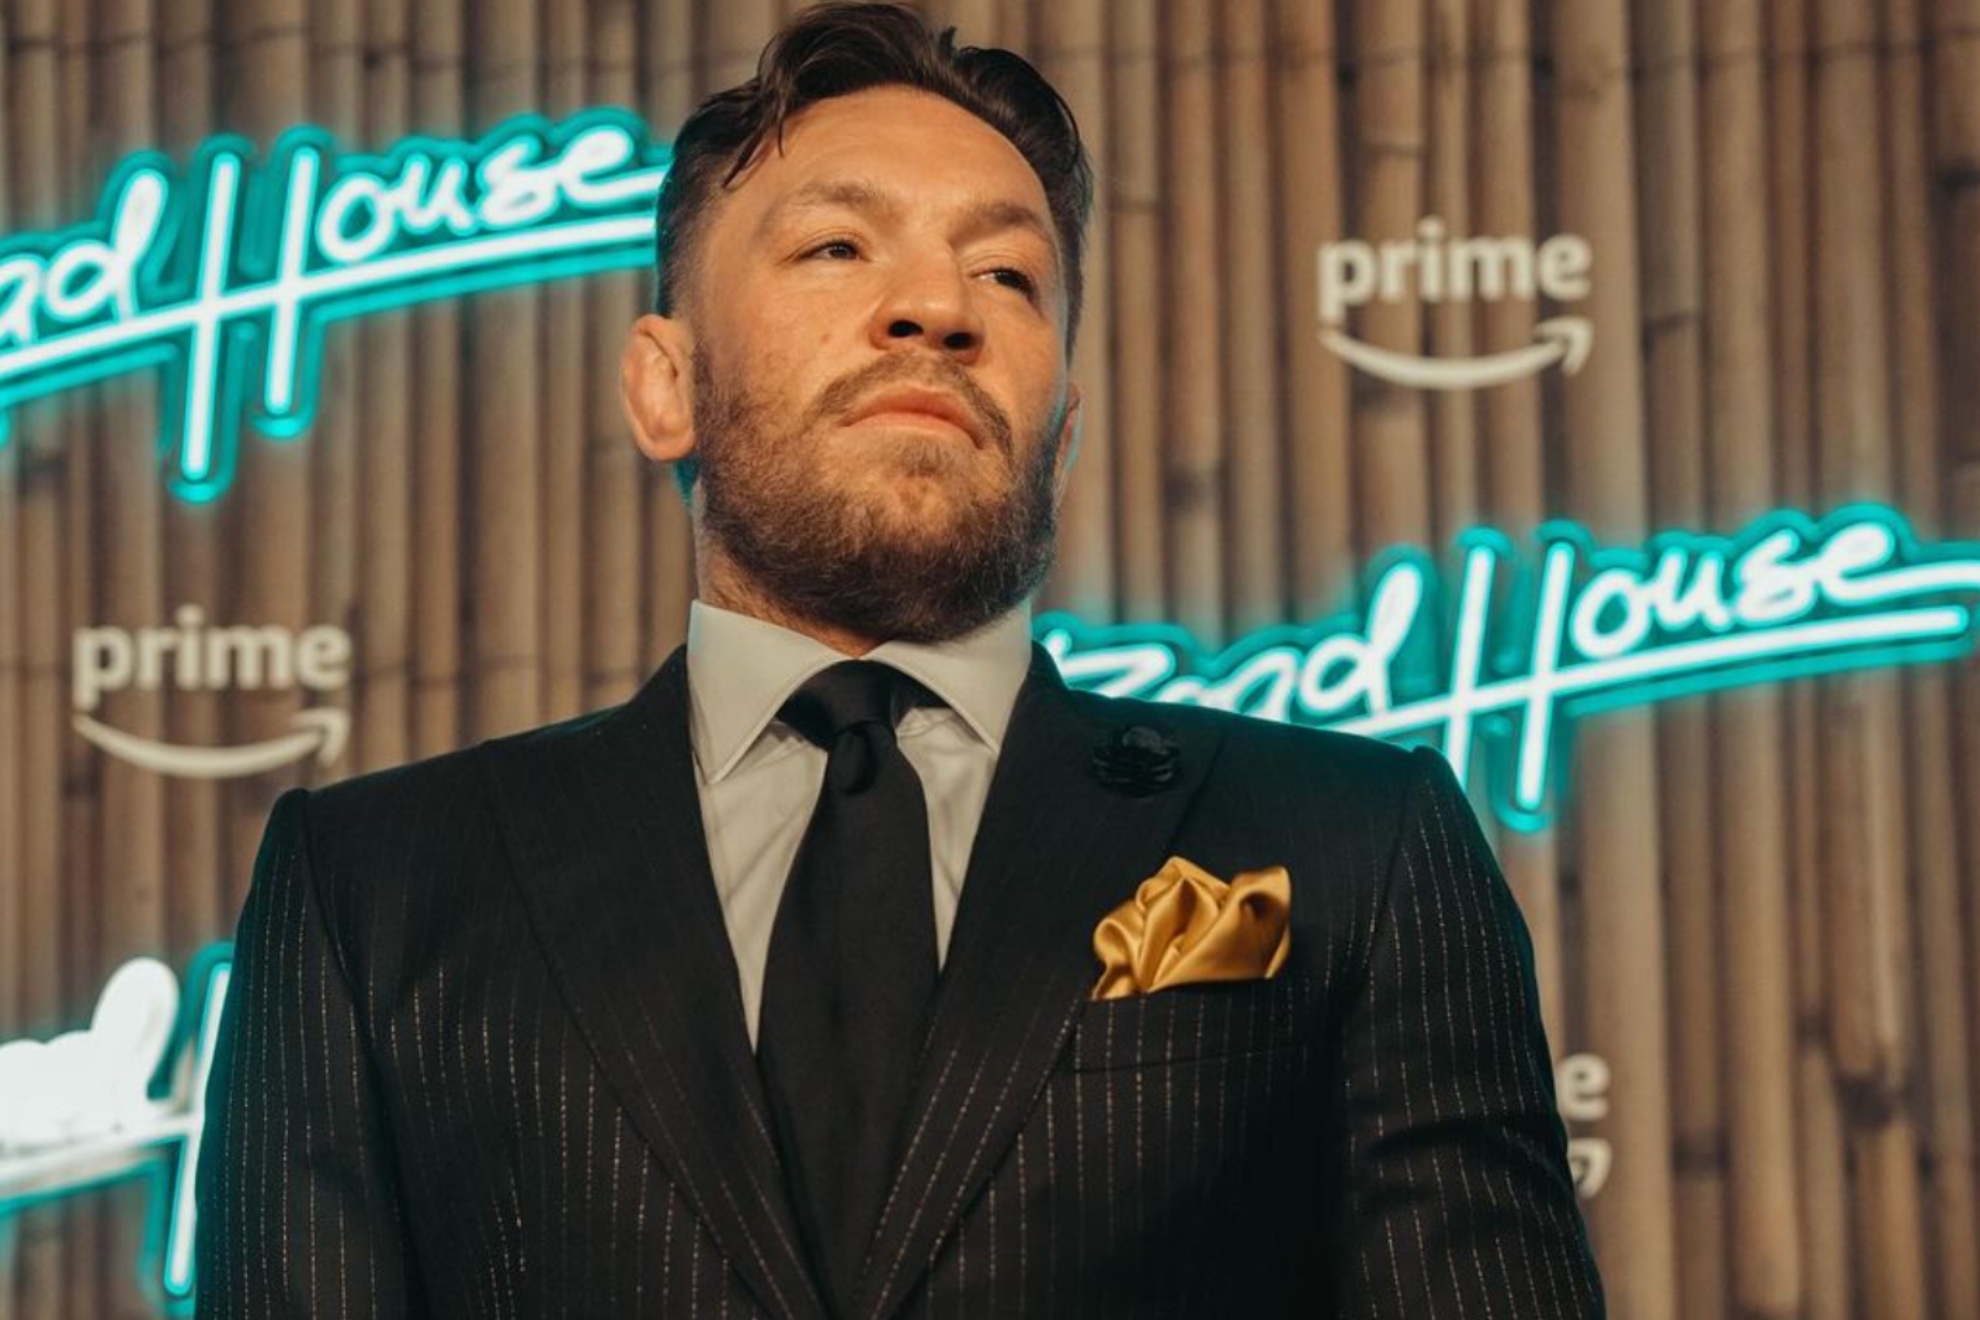 Conor McGregor at the Road House Premiere